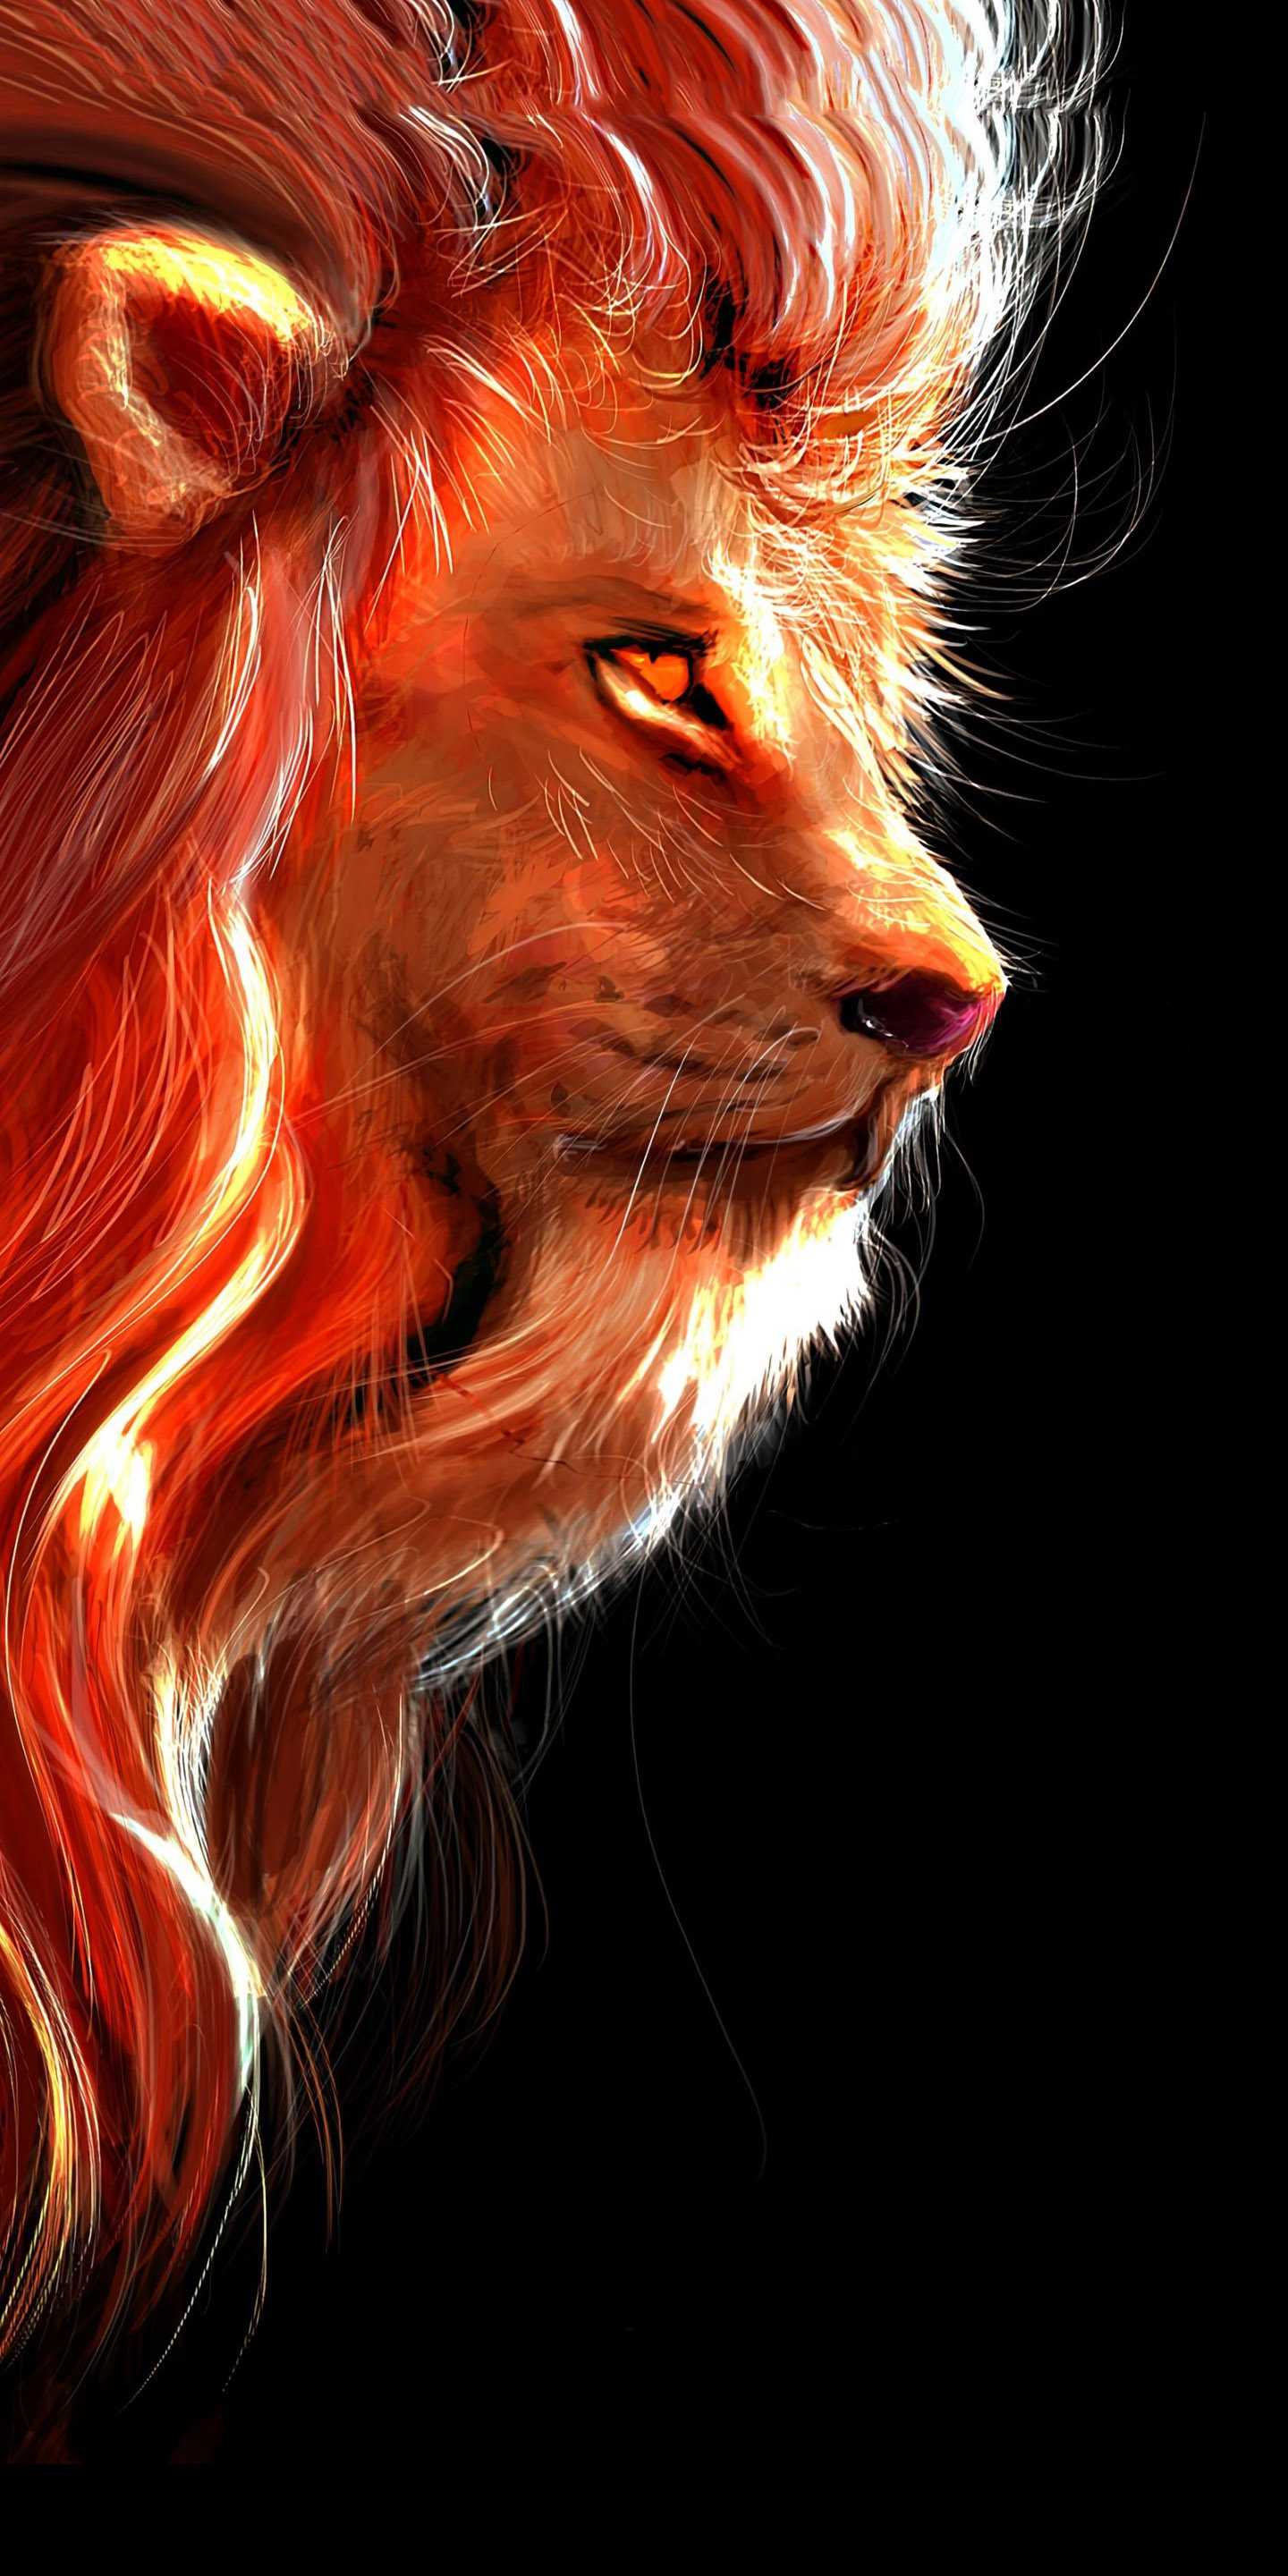 Lion iPhone wallpaper with high-resolution 1080x1920 pixel. You can use this wallpaper for your iPhone 5, 6, 7, 8, X, XS, XR backgrounds, Mobile Screensaver, or iPad Lock Screen - Lion